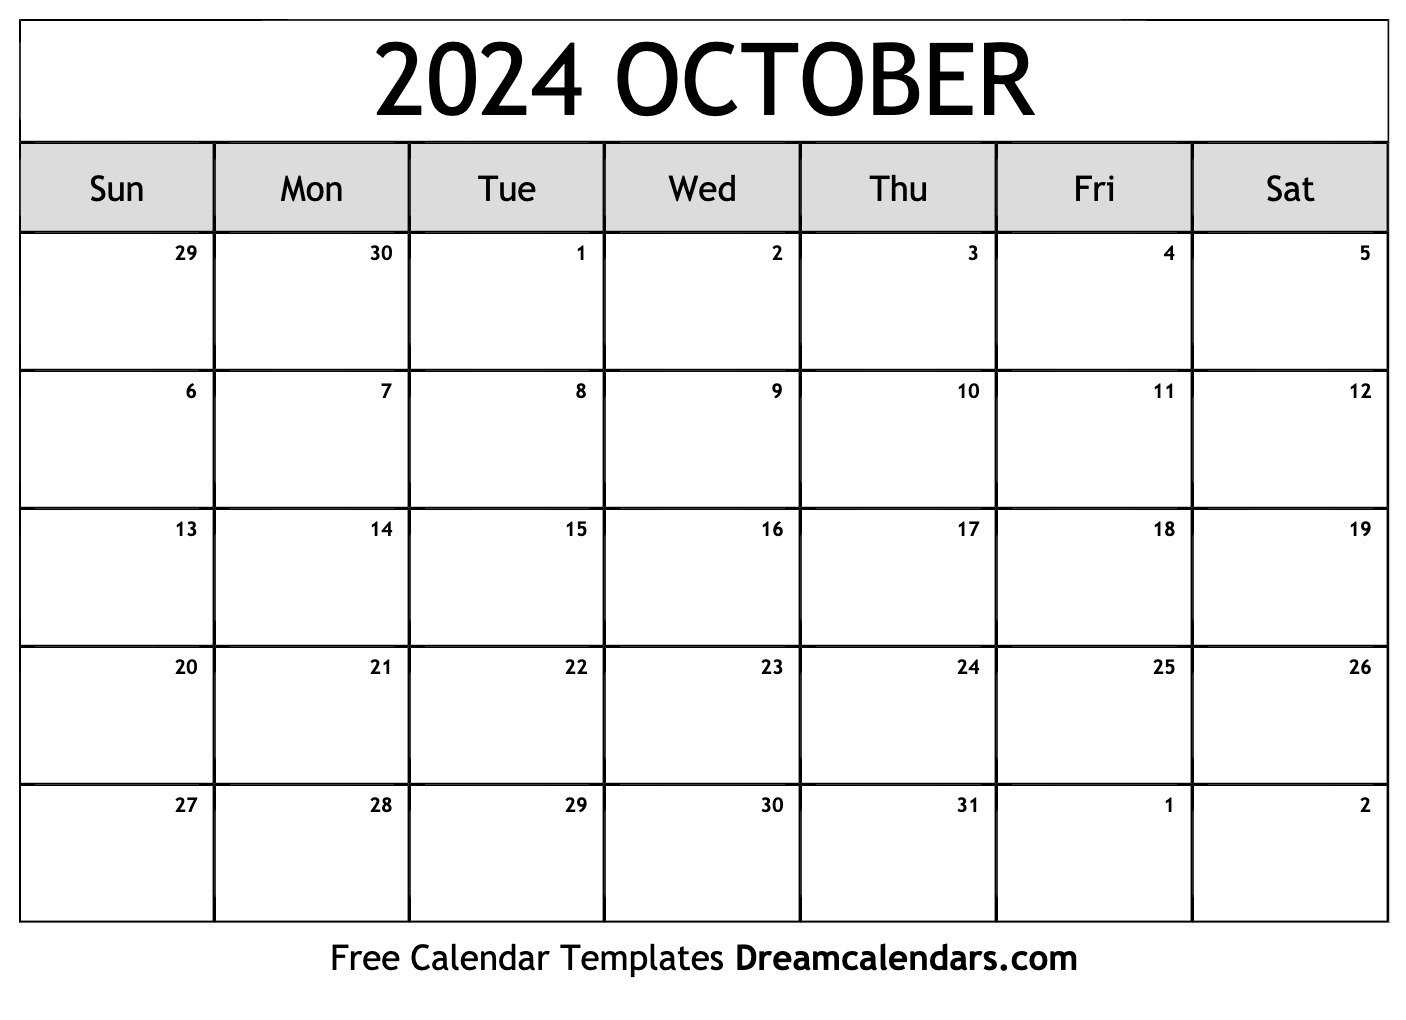 Downloadable October 2024 Calendar Anet Maggee - Free Printable 2024 Calendar October 24calendars